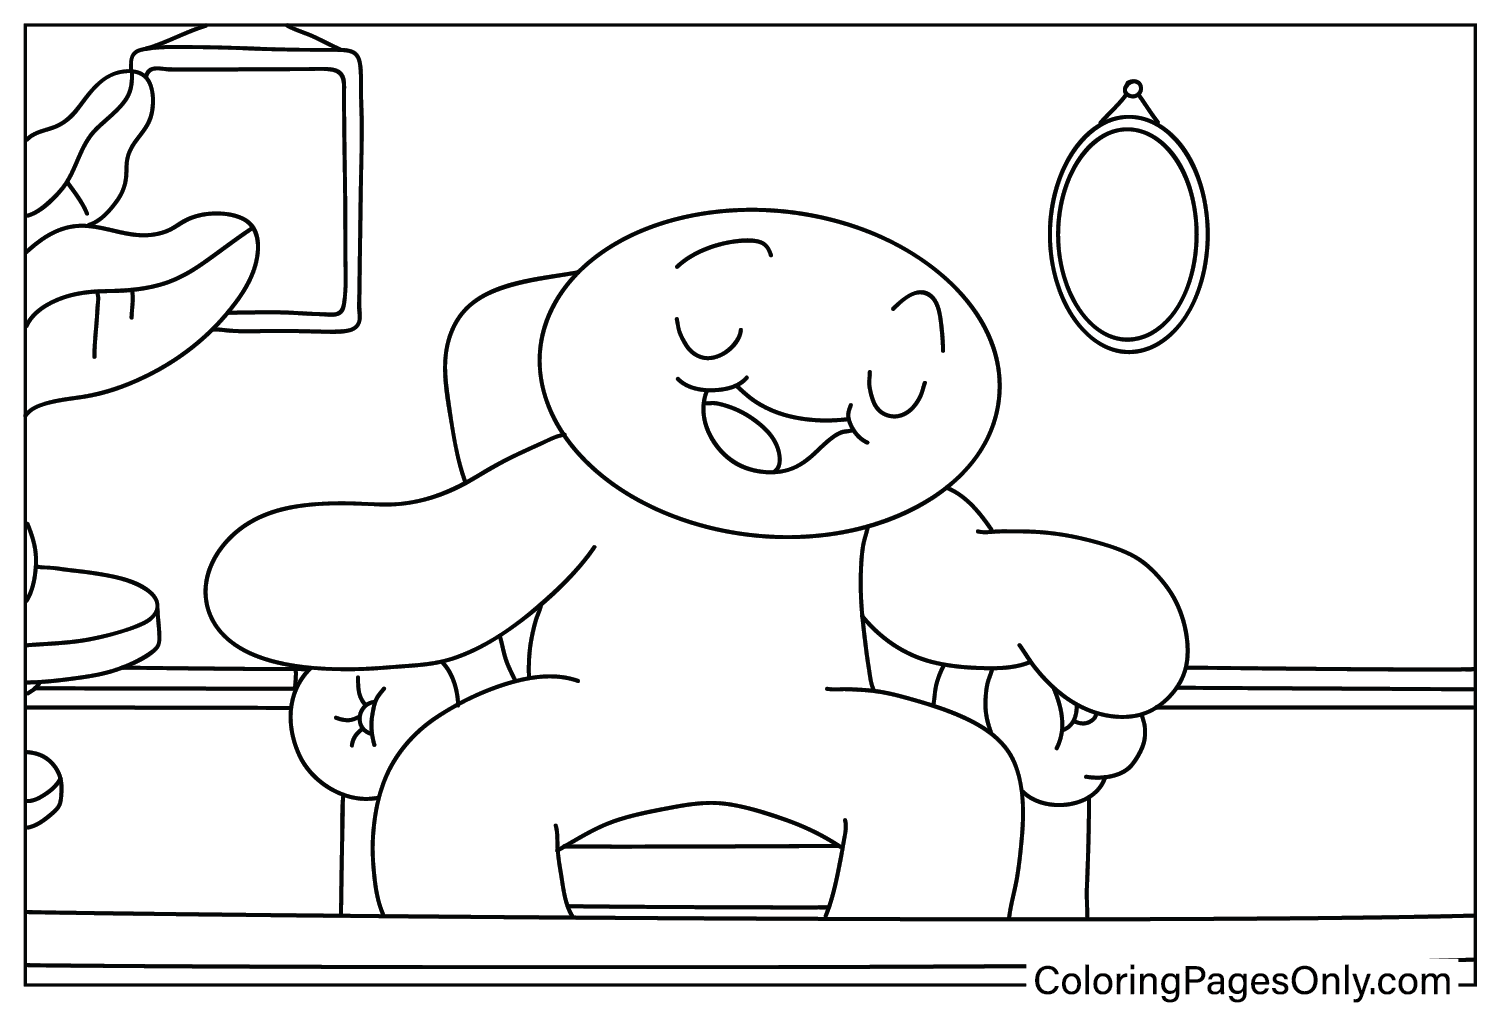 TheOdd1sOut Coloring Page for Adults from TheOdd1sOut